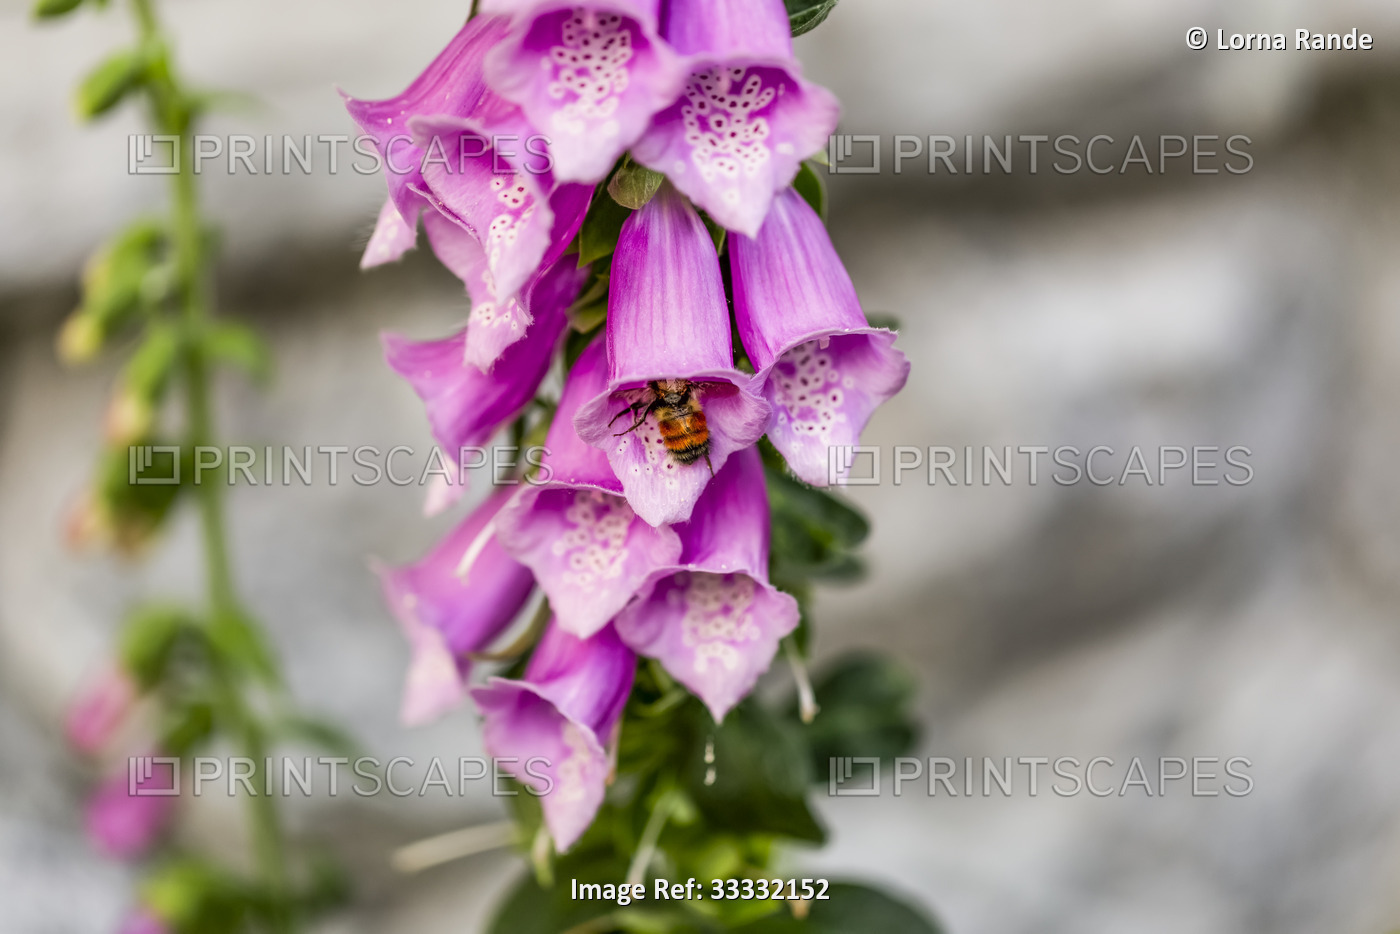 Bumble Bee (Bombus) collecting nectar from the bell-shaped flower of a foxglove ...